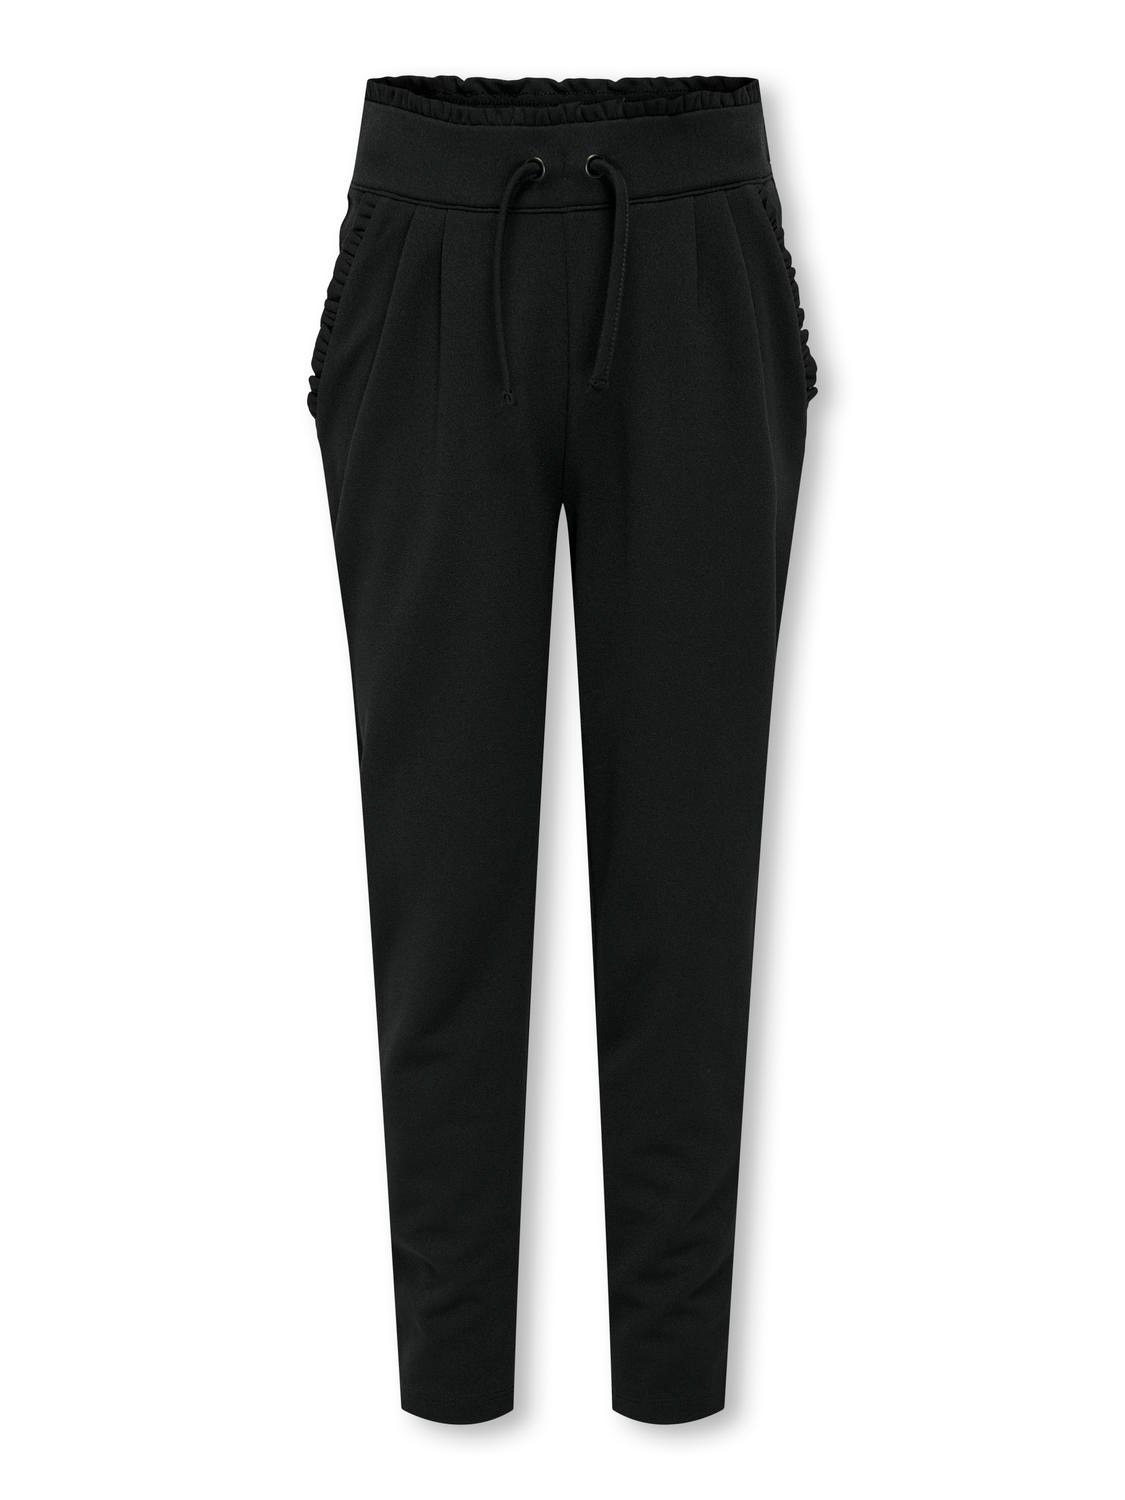 ONLY Slim Fit Trousers -Black - 15327743